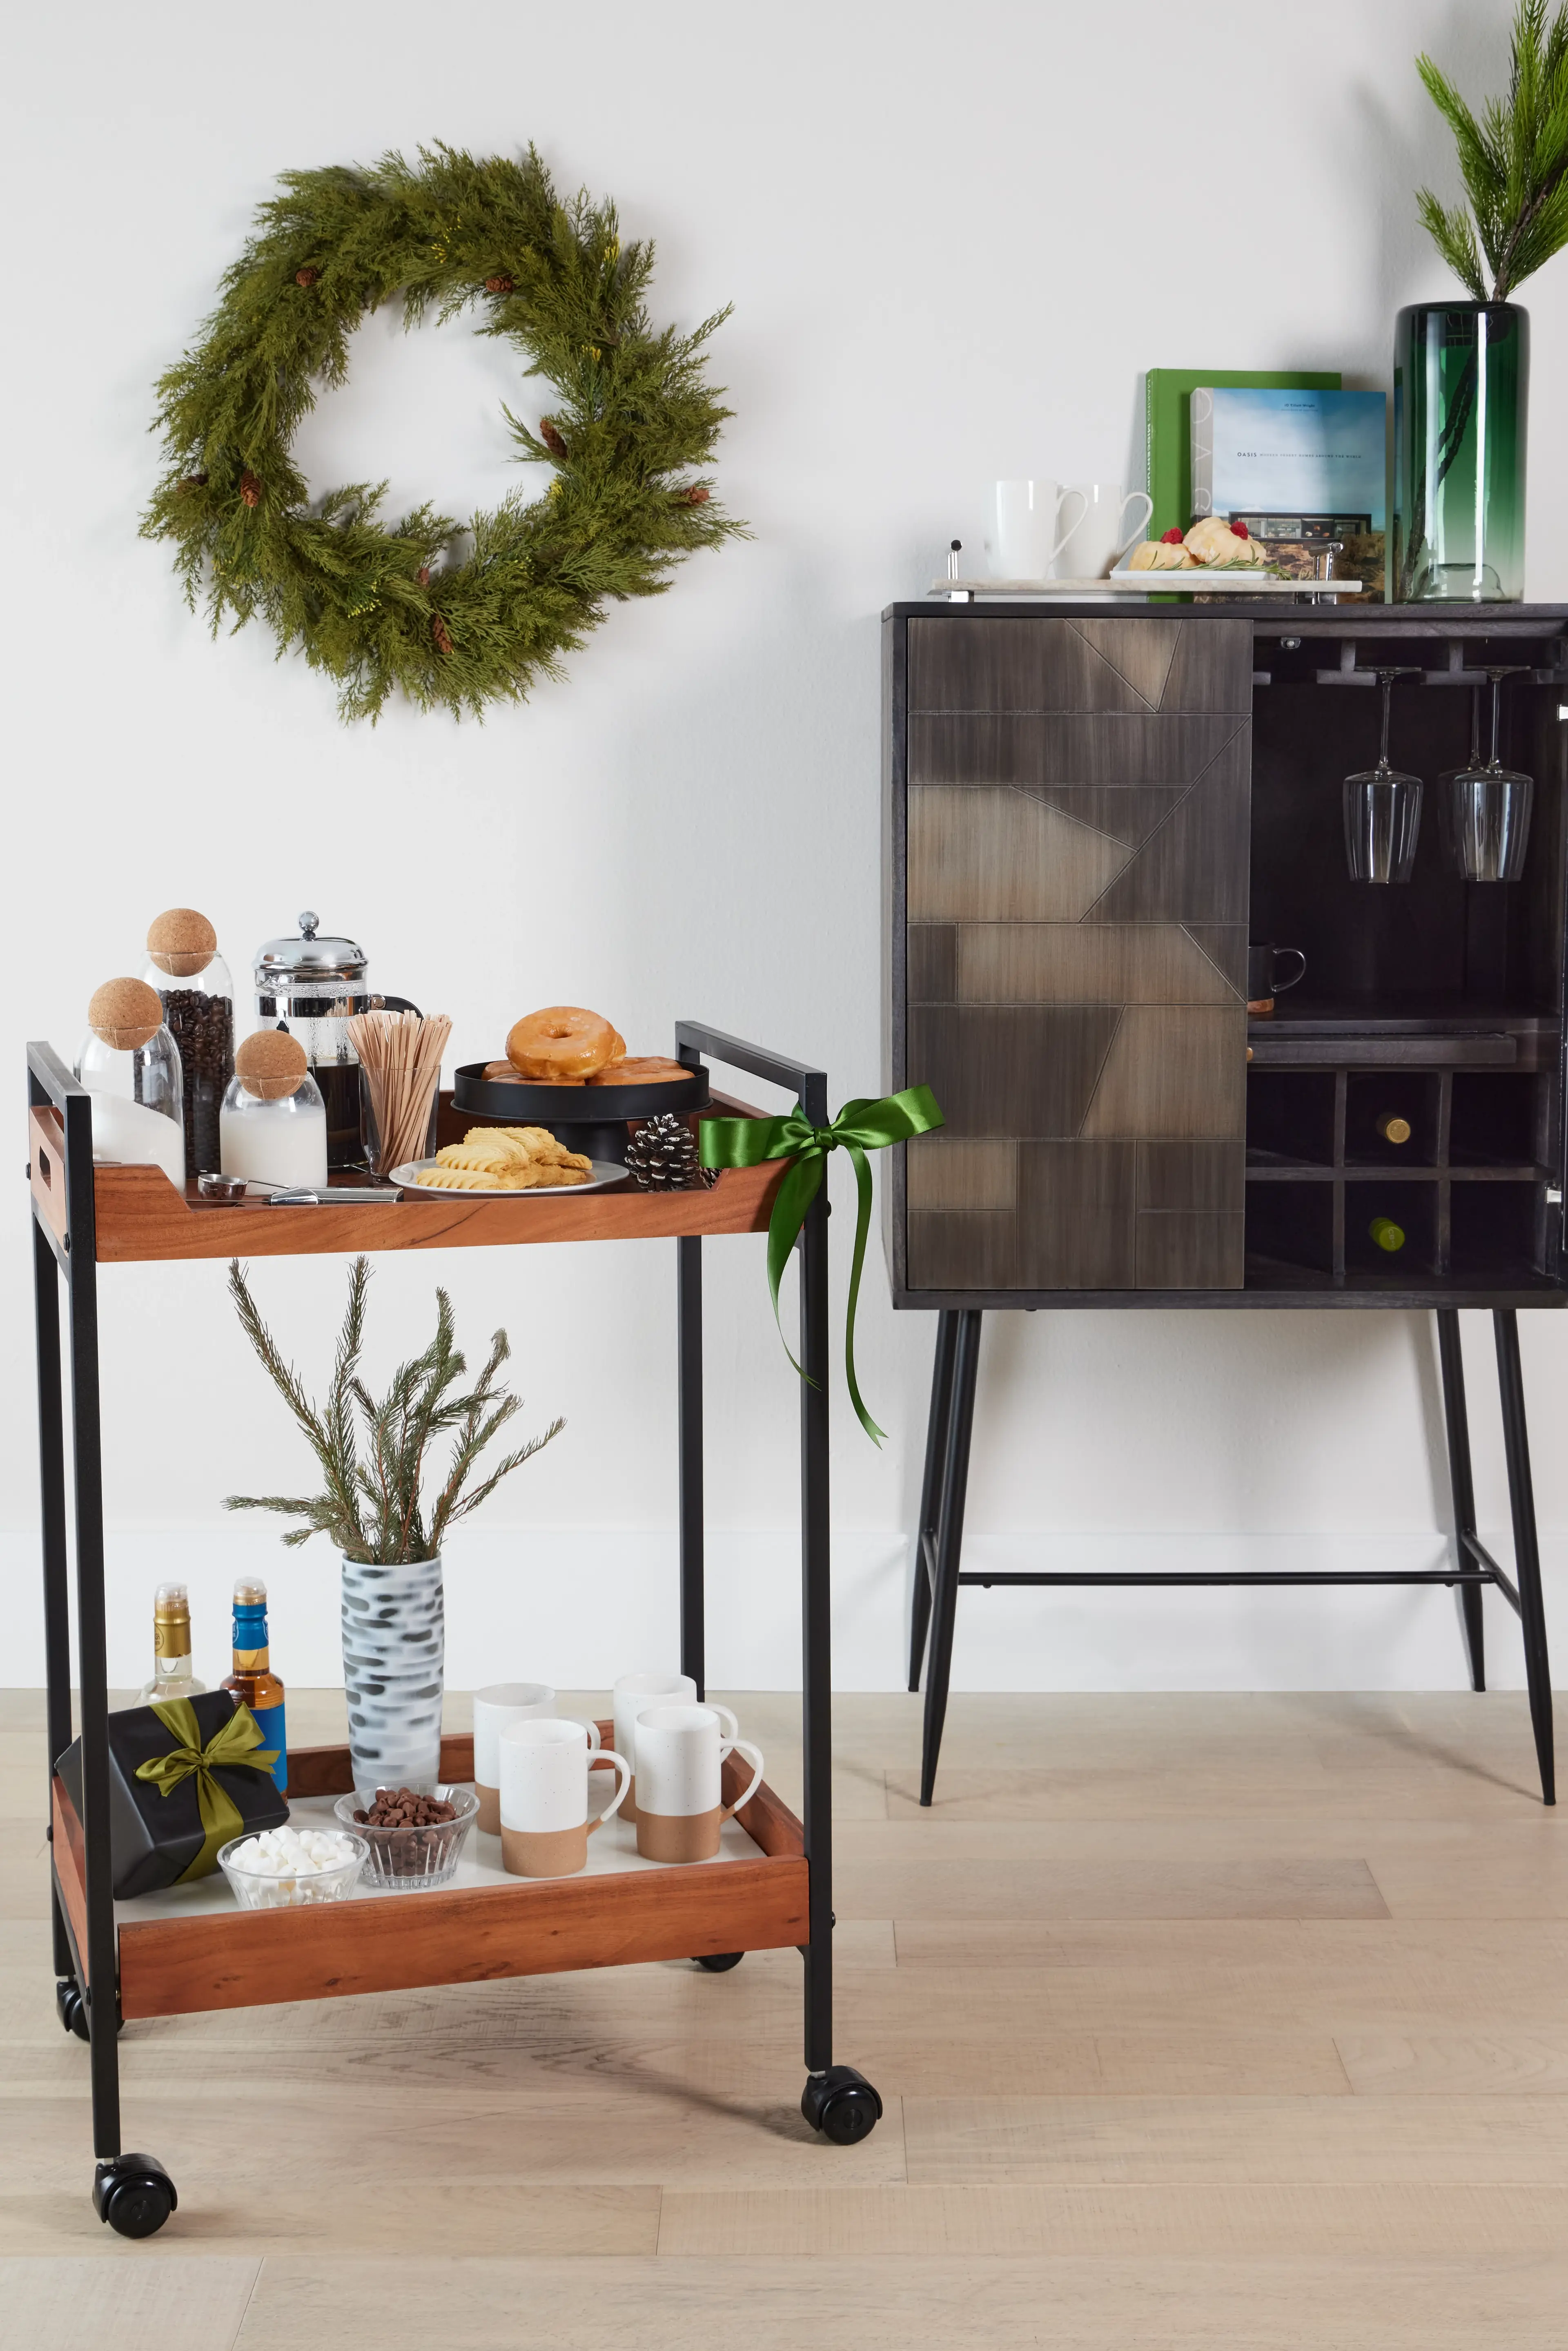 Elevate Your Bar Cart: Adding Style Beyond Booze